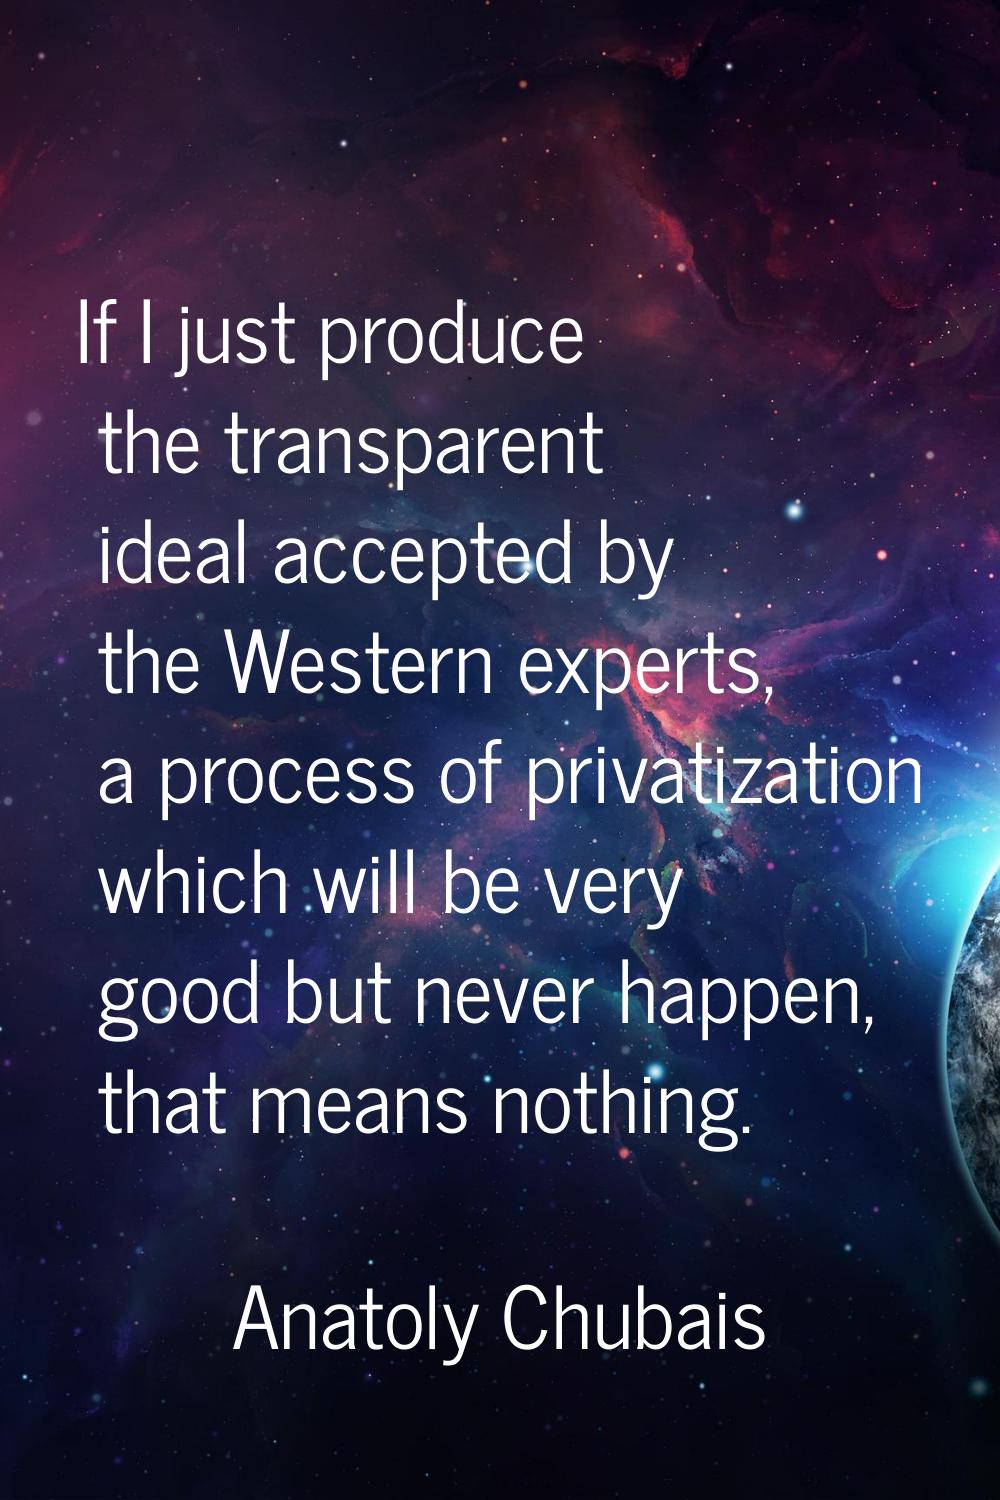 If I just produce the transparent ideal accepted by the Western experts, a process of privatization